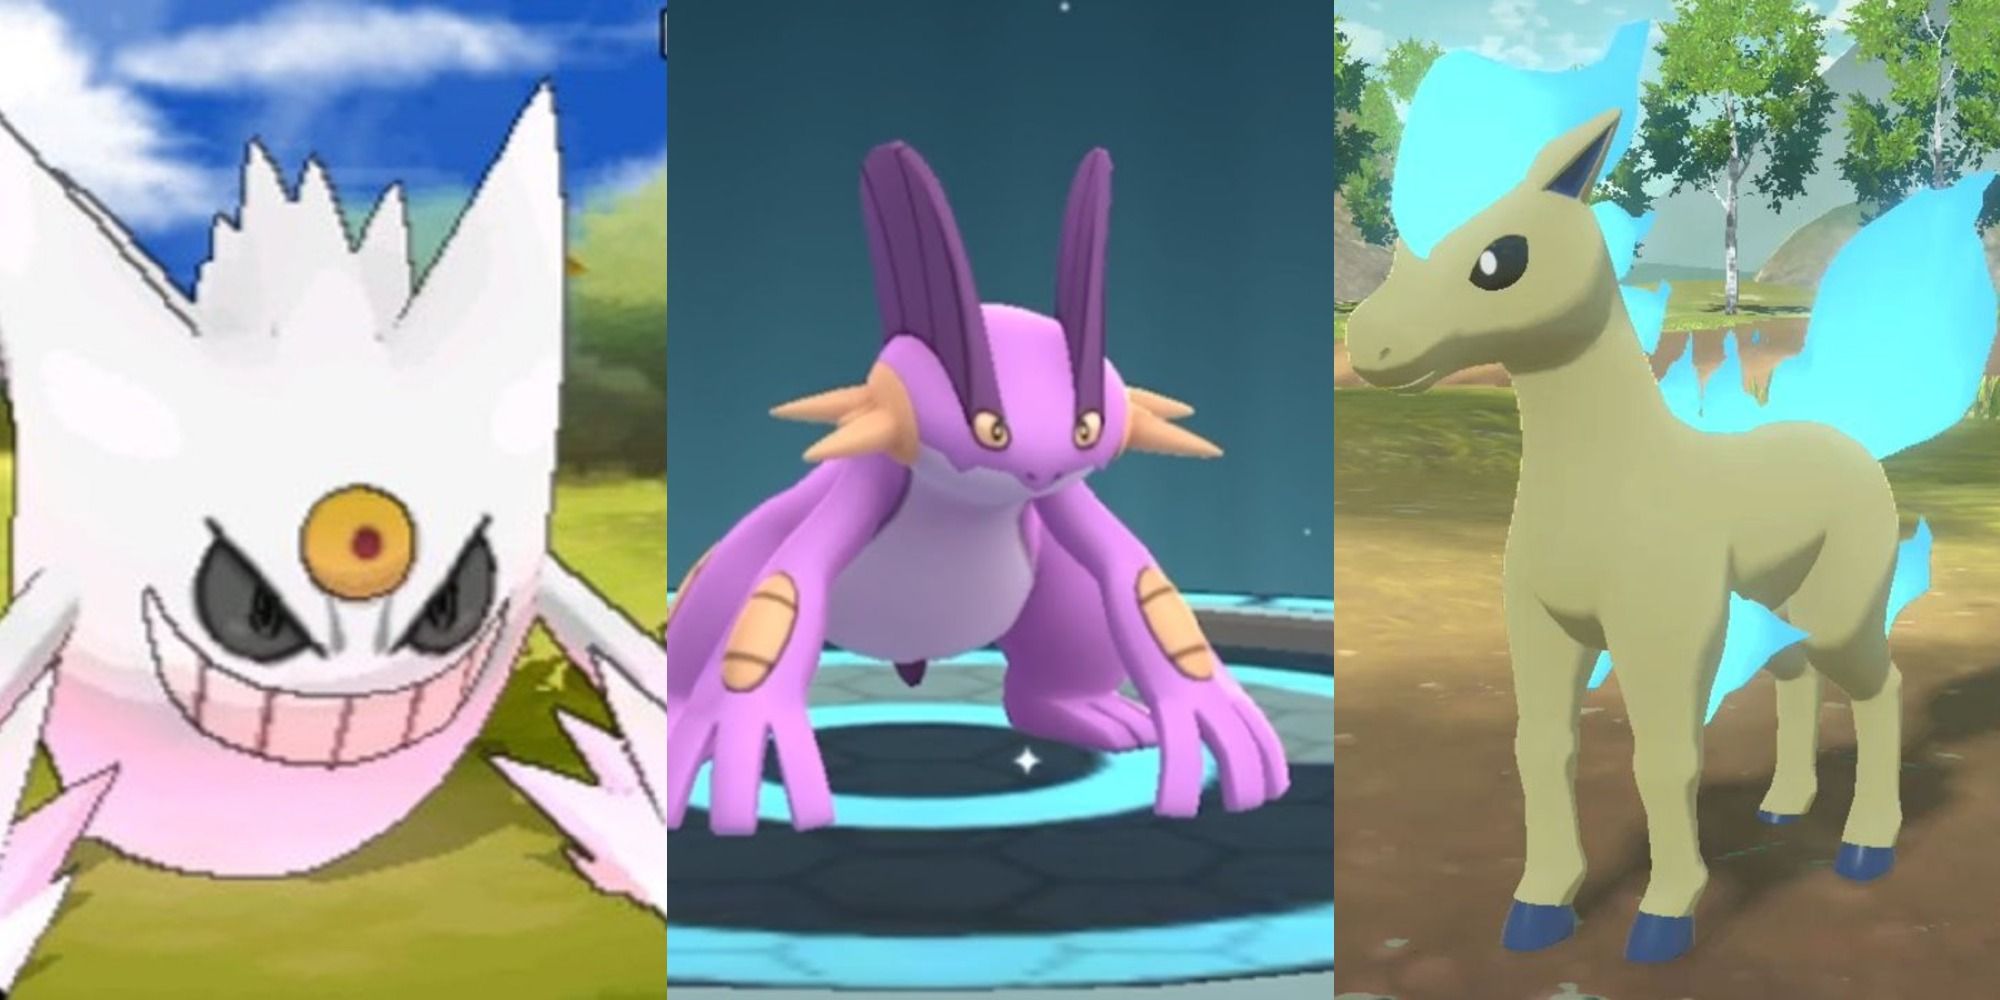 Pokemon Let's Go shiny odds  What are the real chances of a shiny